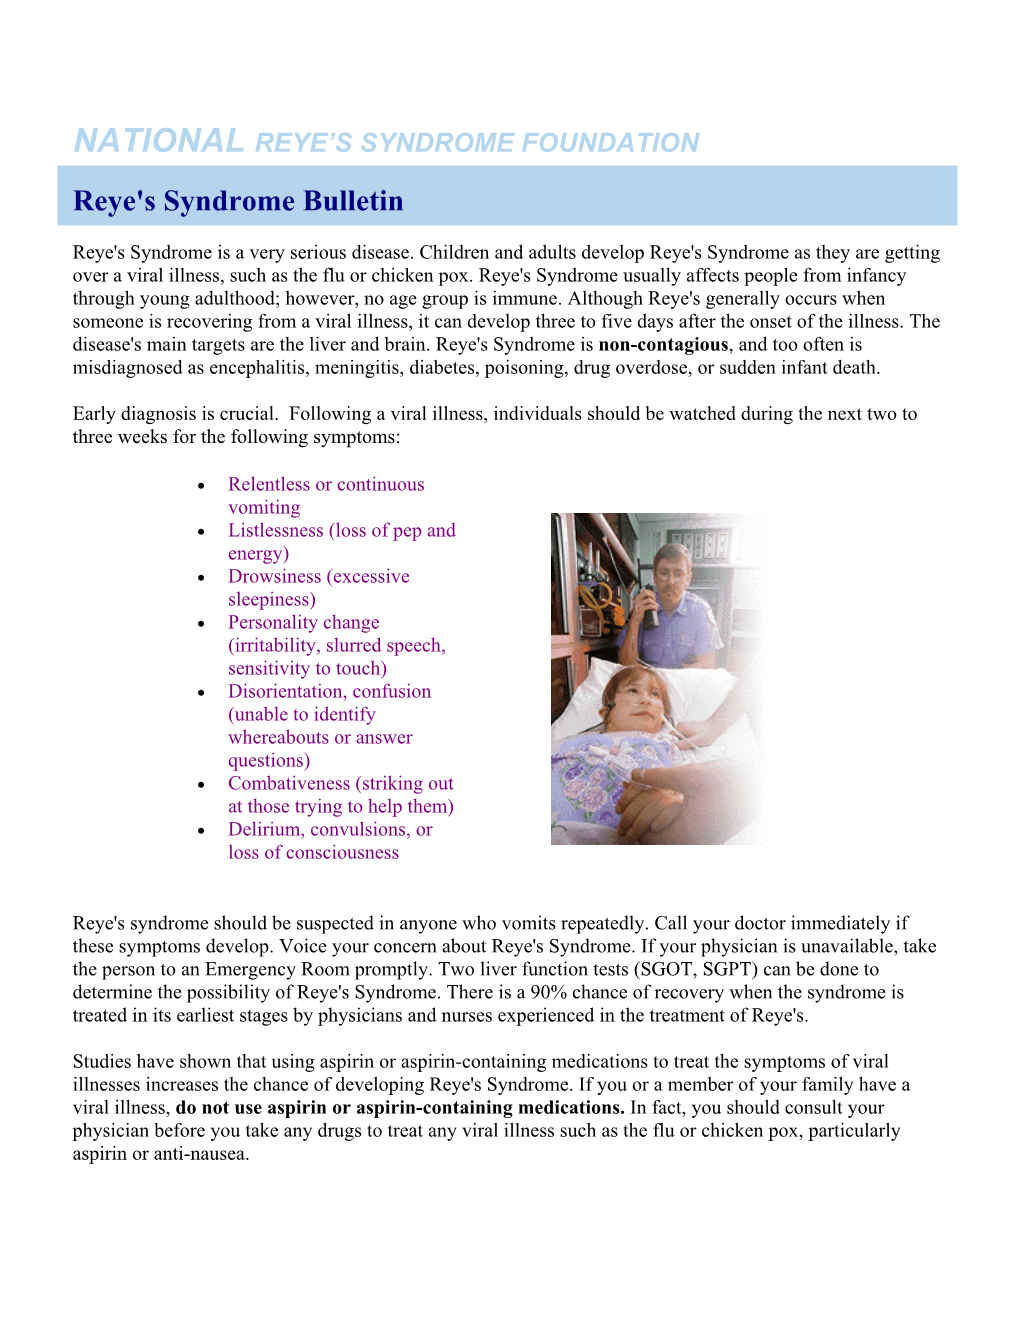 National Reye's Syndrome Foundation (NRSF), the U.S